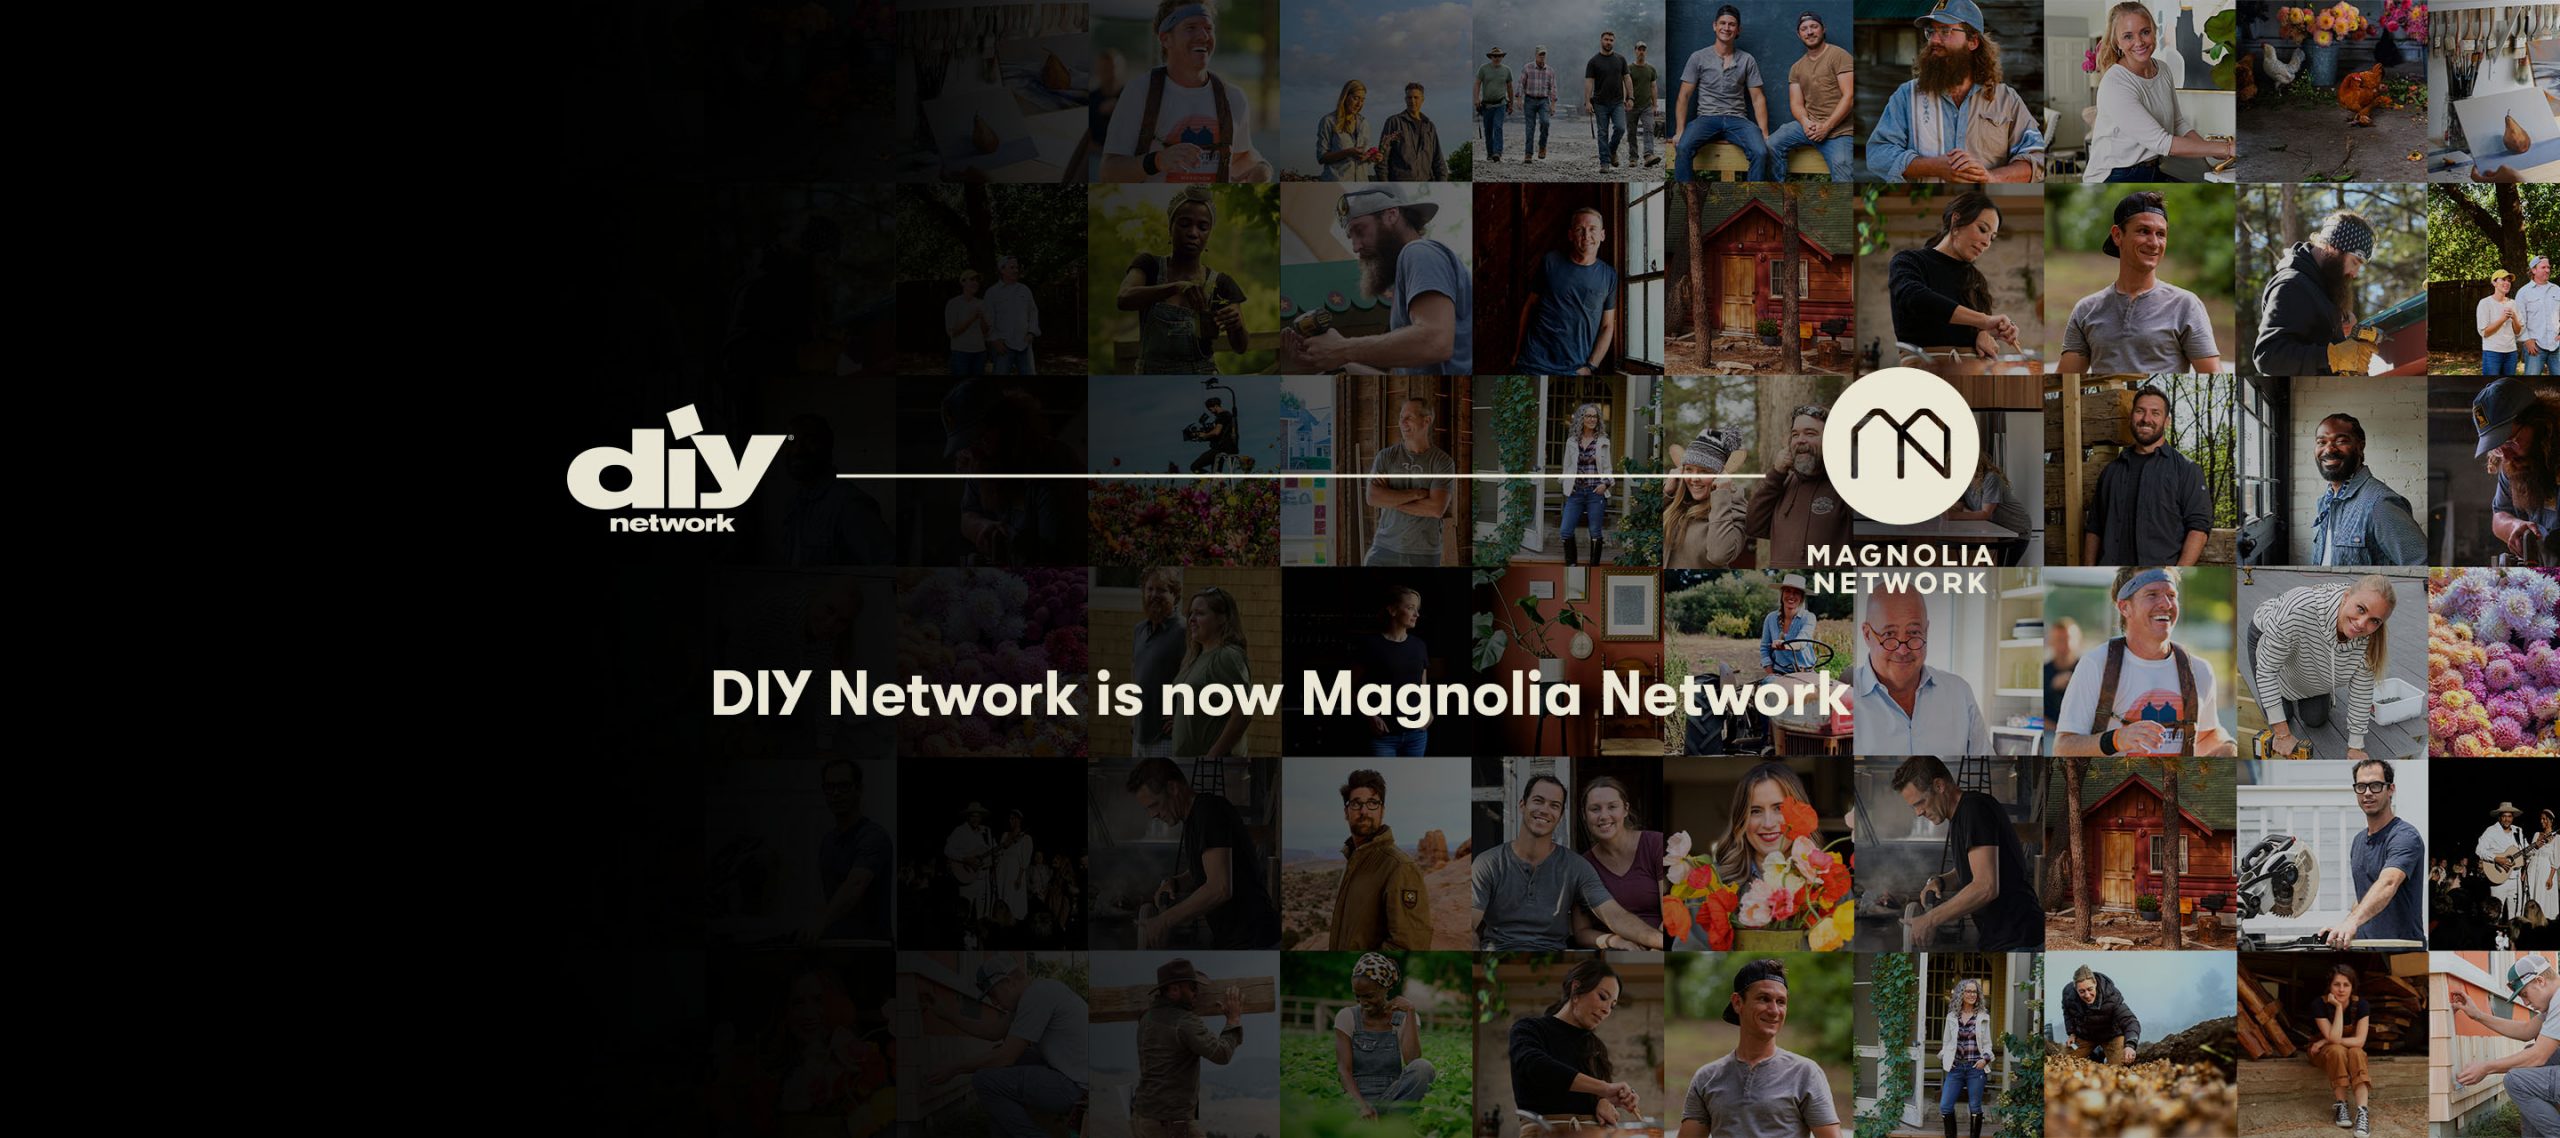 How to Watch DIYNetwork com Activate on Roku, Fire TV, Apple TV, or Android TV